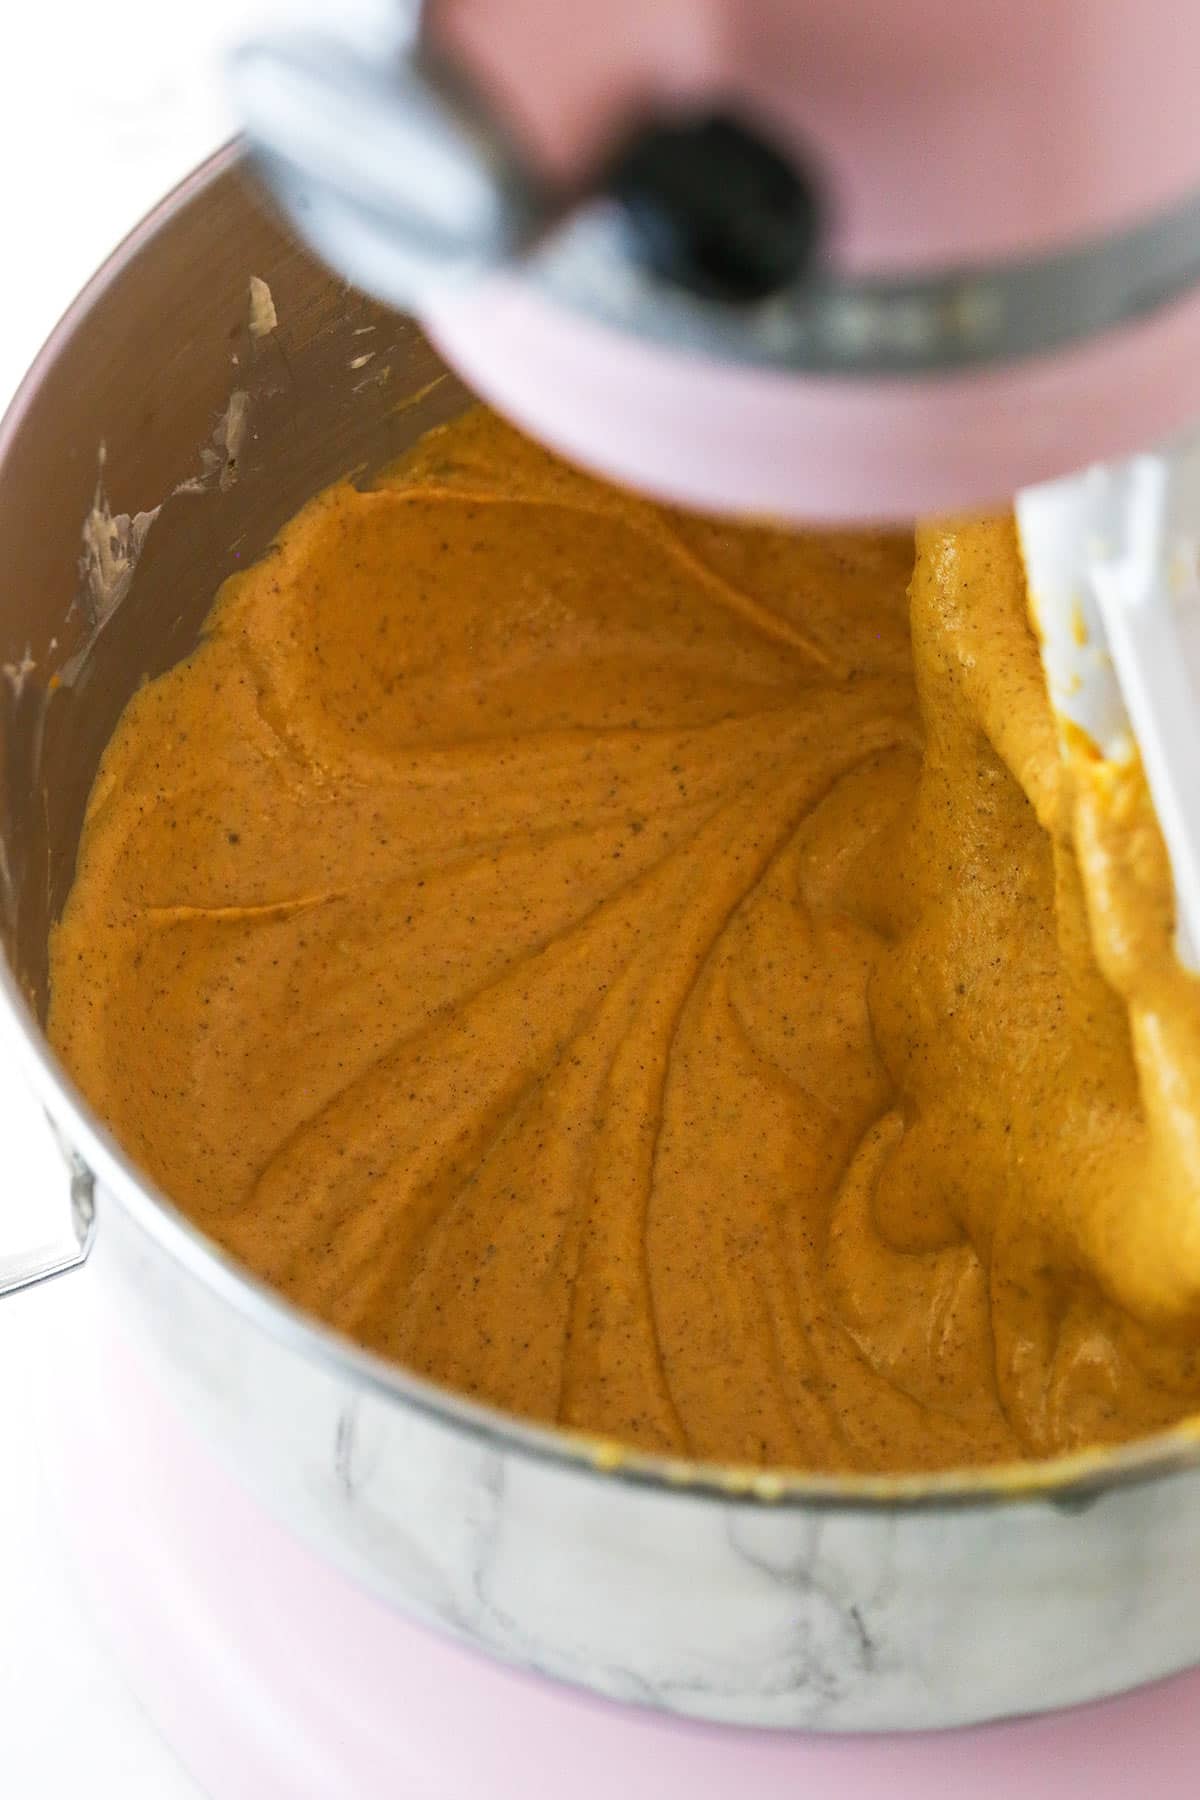 The cream cheese mixture being combined with the puree, sour cream, vanilla and spices in an electric mixing bowl